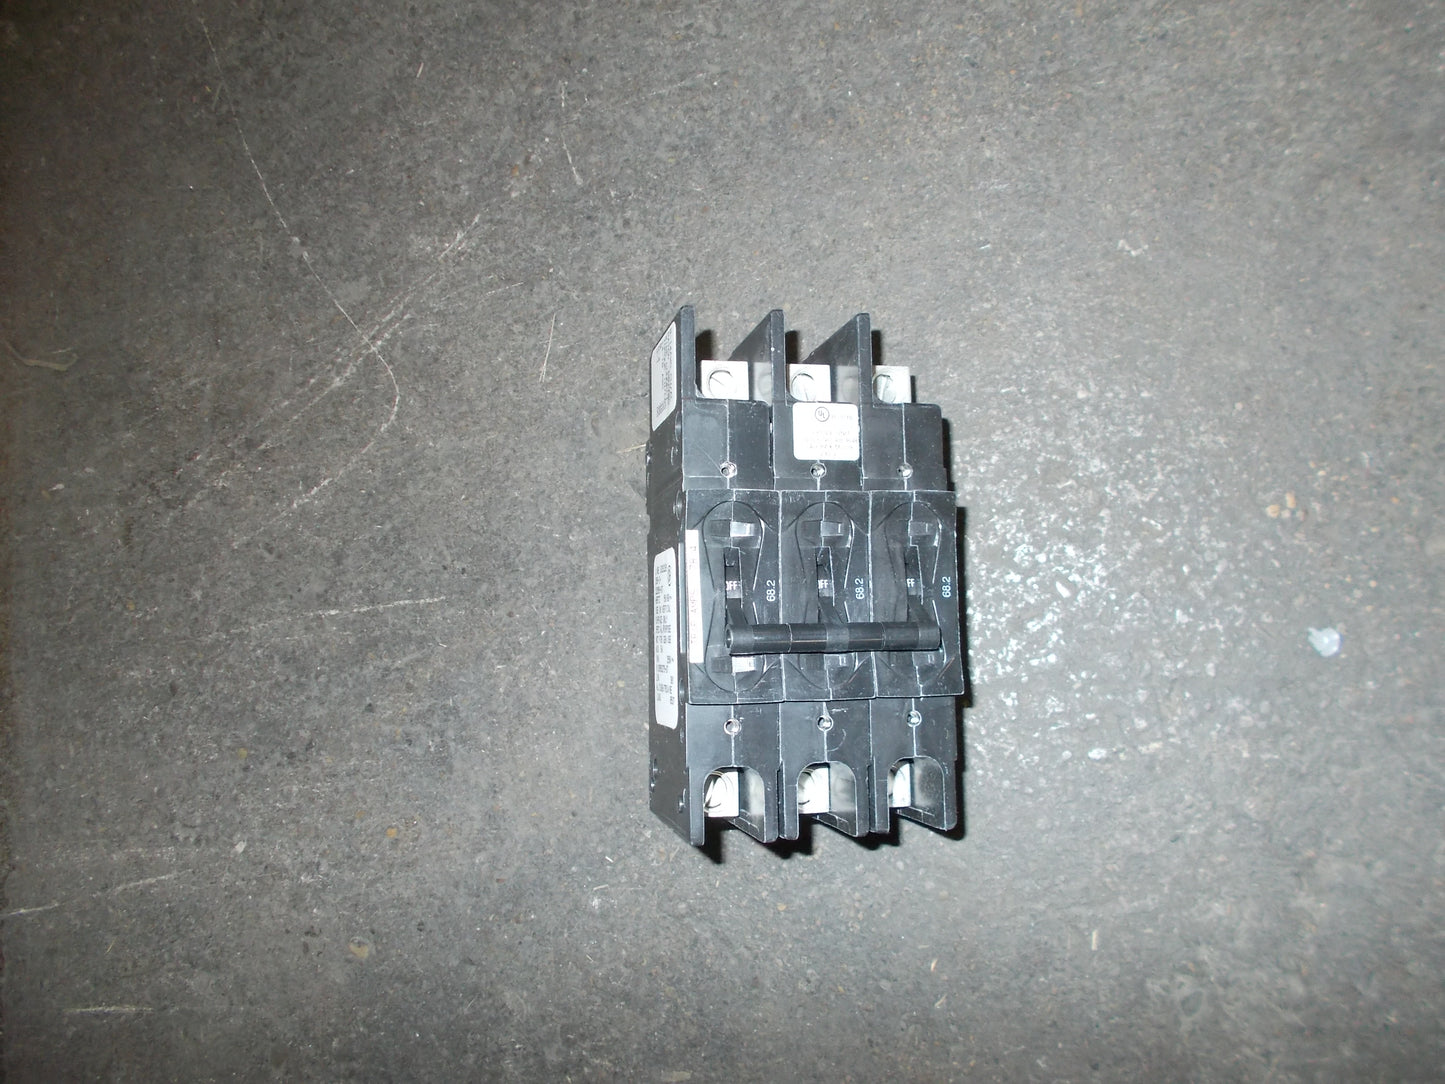 3 POLE 68.2 AMP "209 MULTI-POLE" SERIES HYDRAULIC MAGNETIC CIRCUIT BREAKER PROTECTOR 240/50-60/1 OR 3